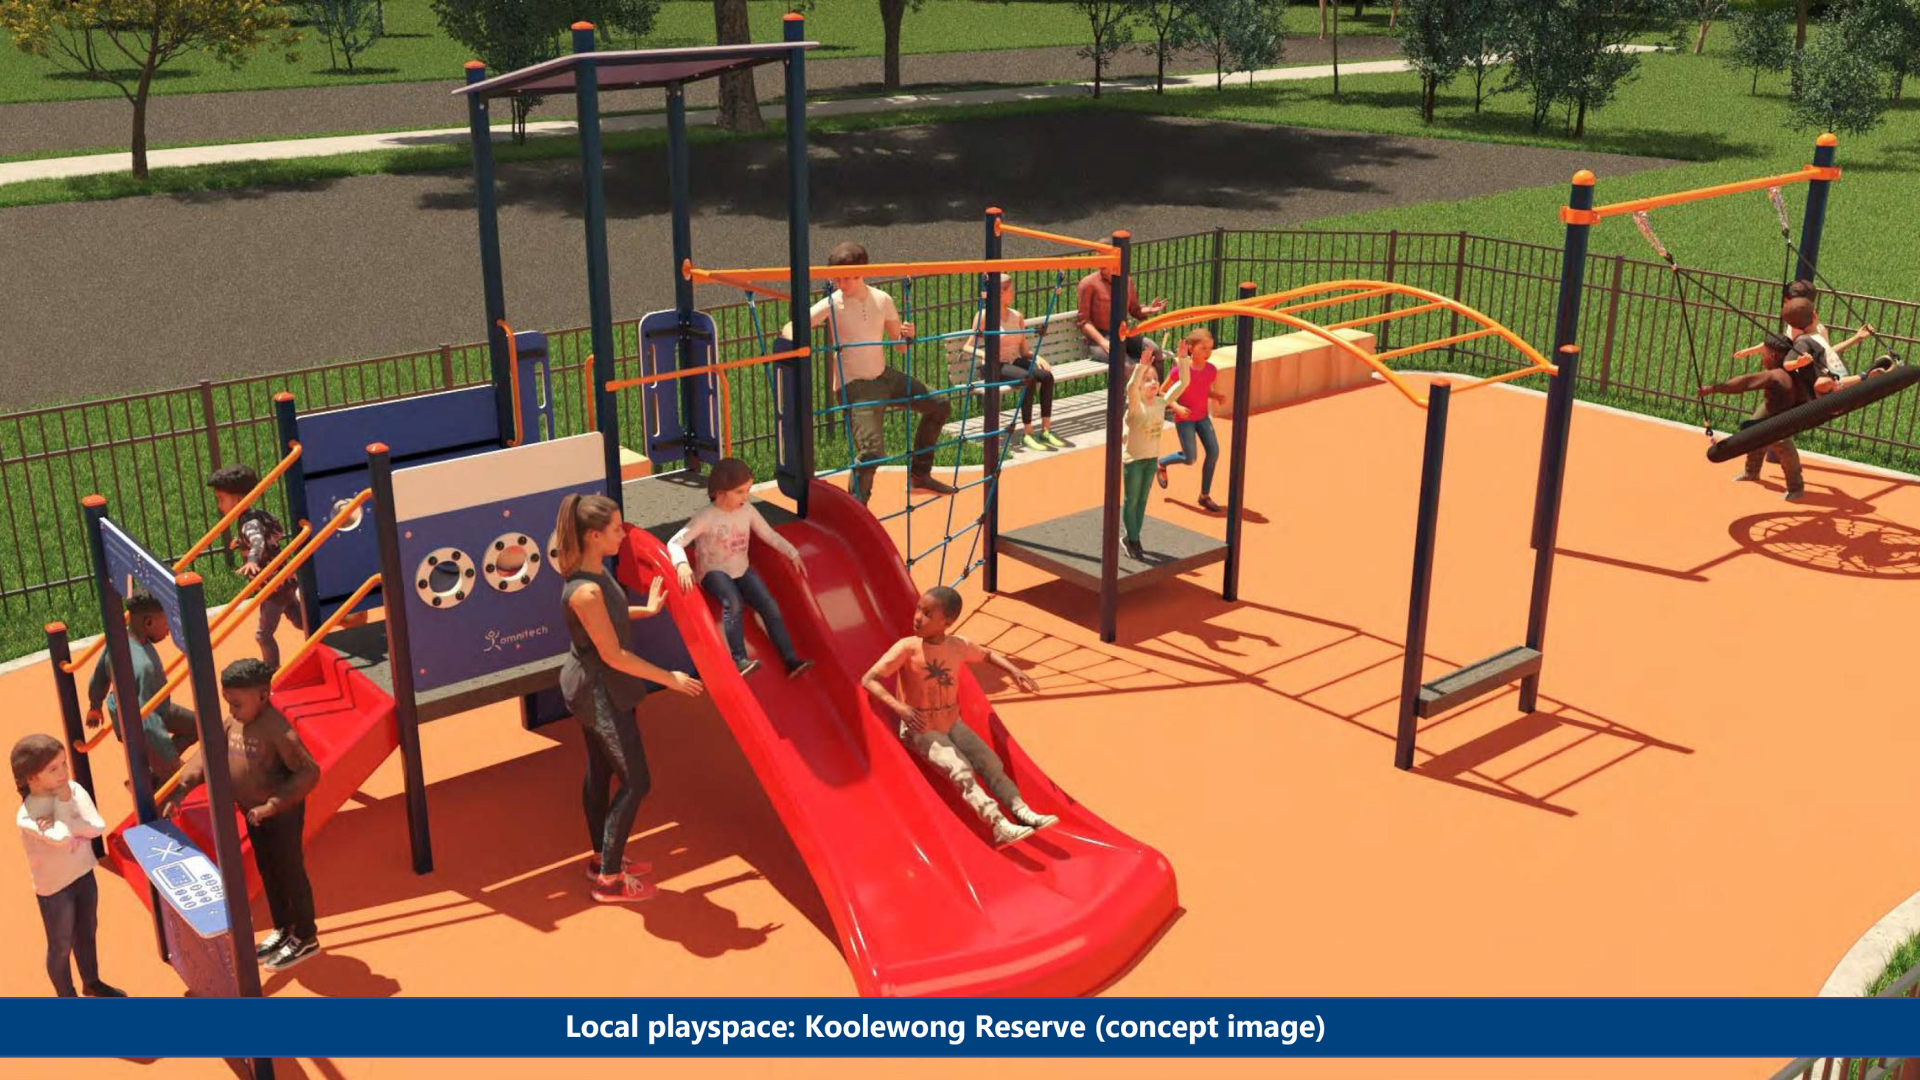 Koolewong Reserve local playspace